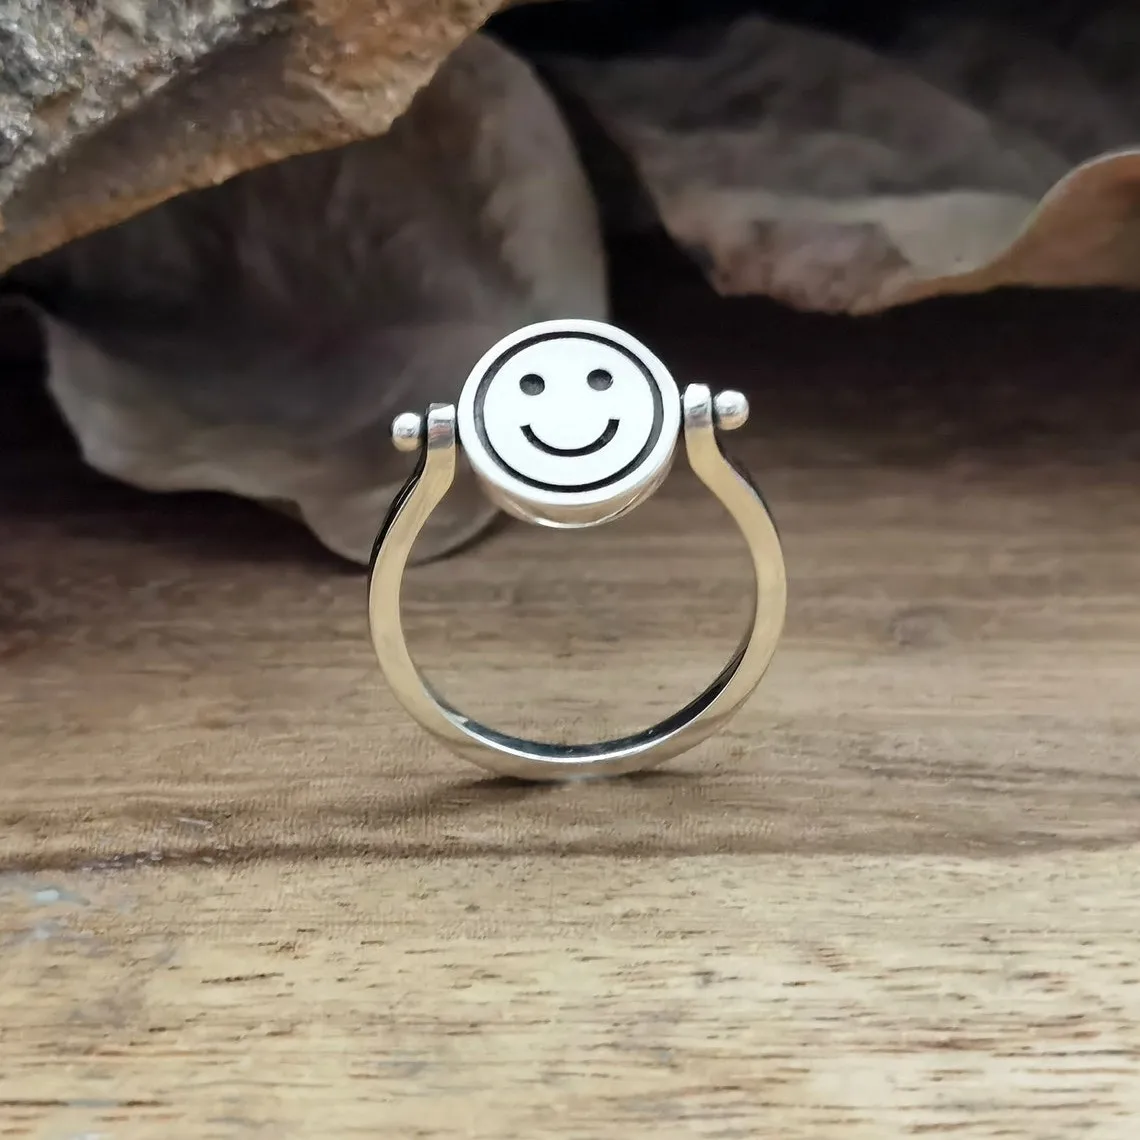 

Double-faced Smiley Sad Face Rotatable Rings 2022 Trend Anxiety Ring Anti-Stress Fidget Ring For Couples Women Emo Men's Rings